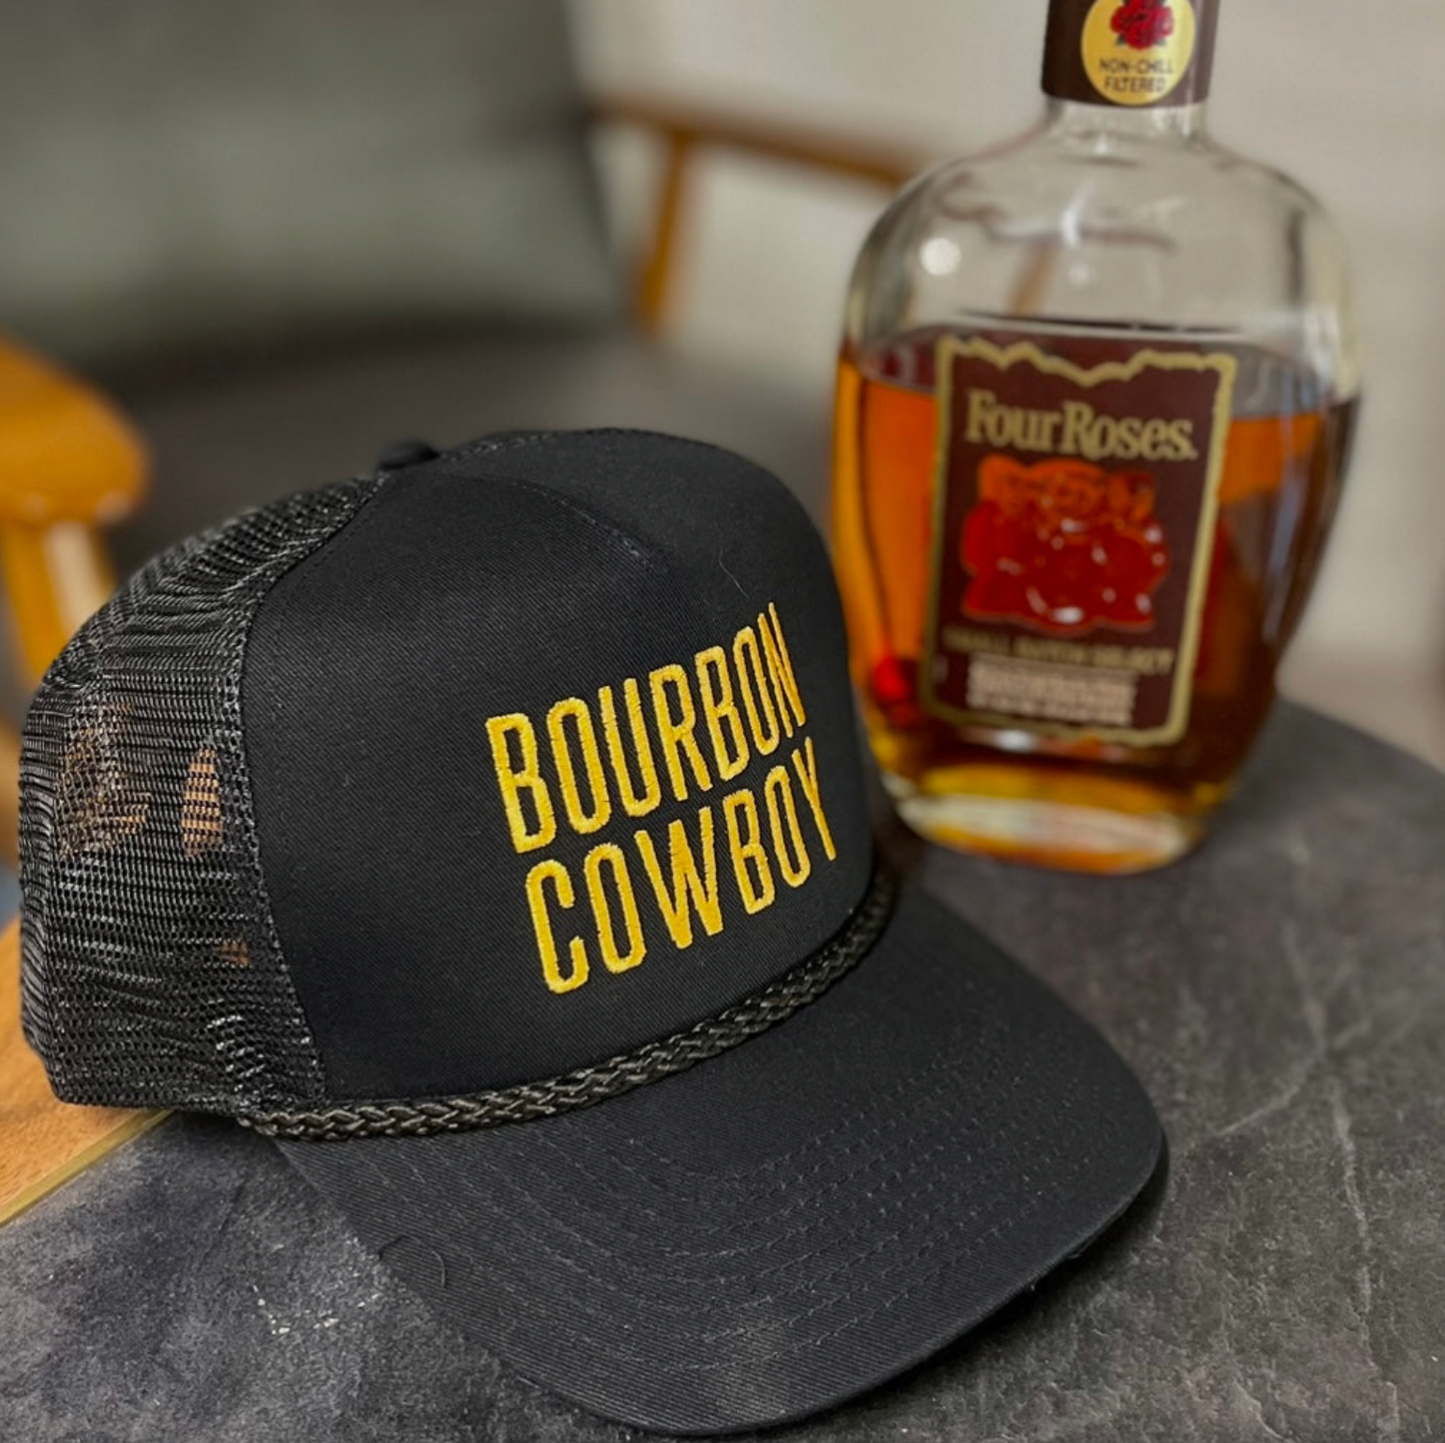 Bourbon Cowboy Hat by Tumbleweed TexStyles